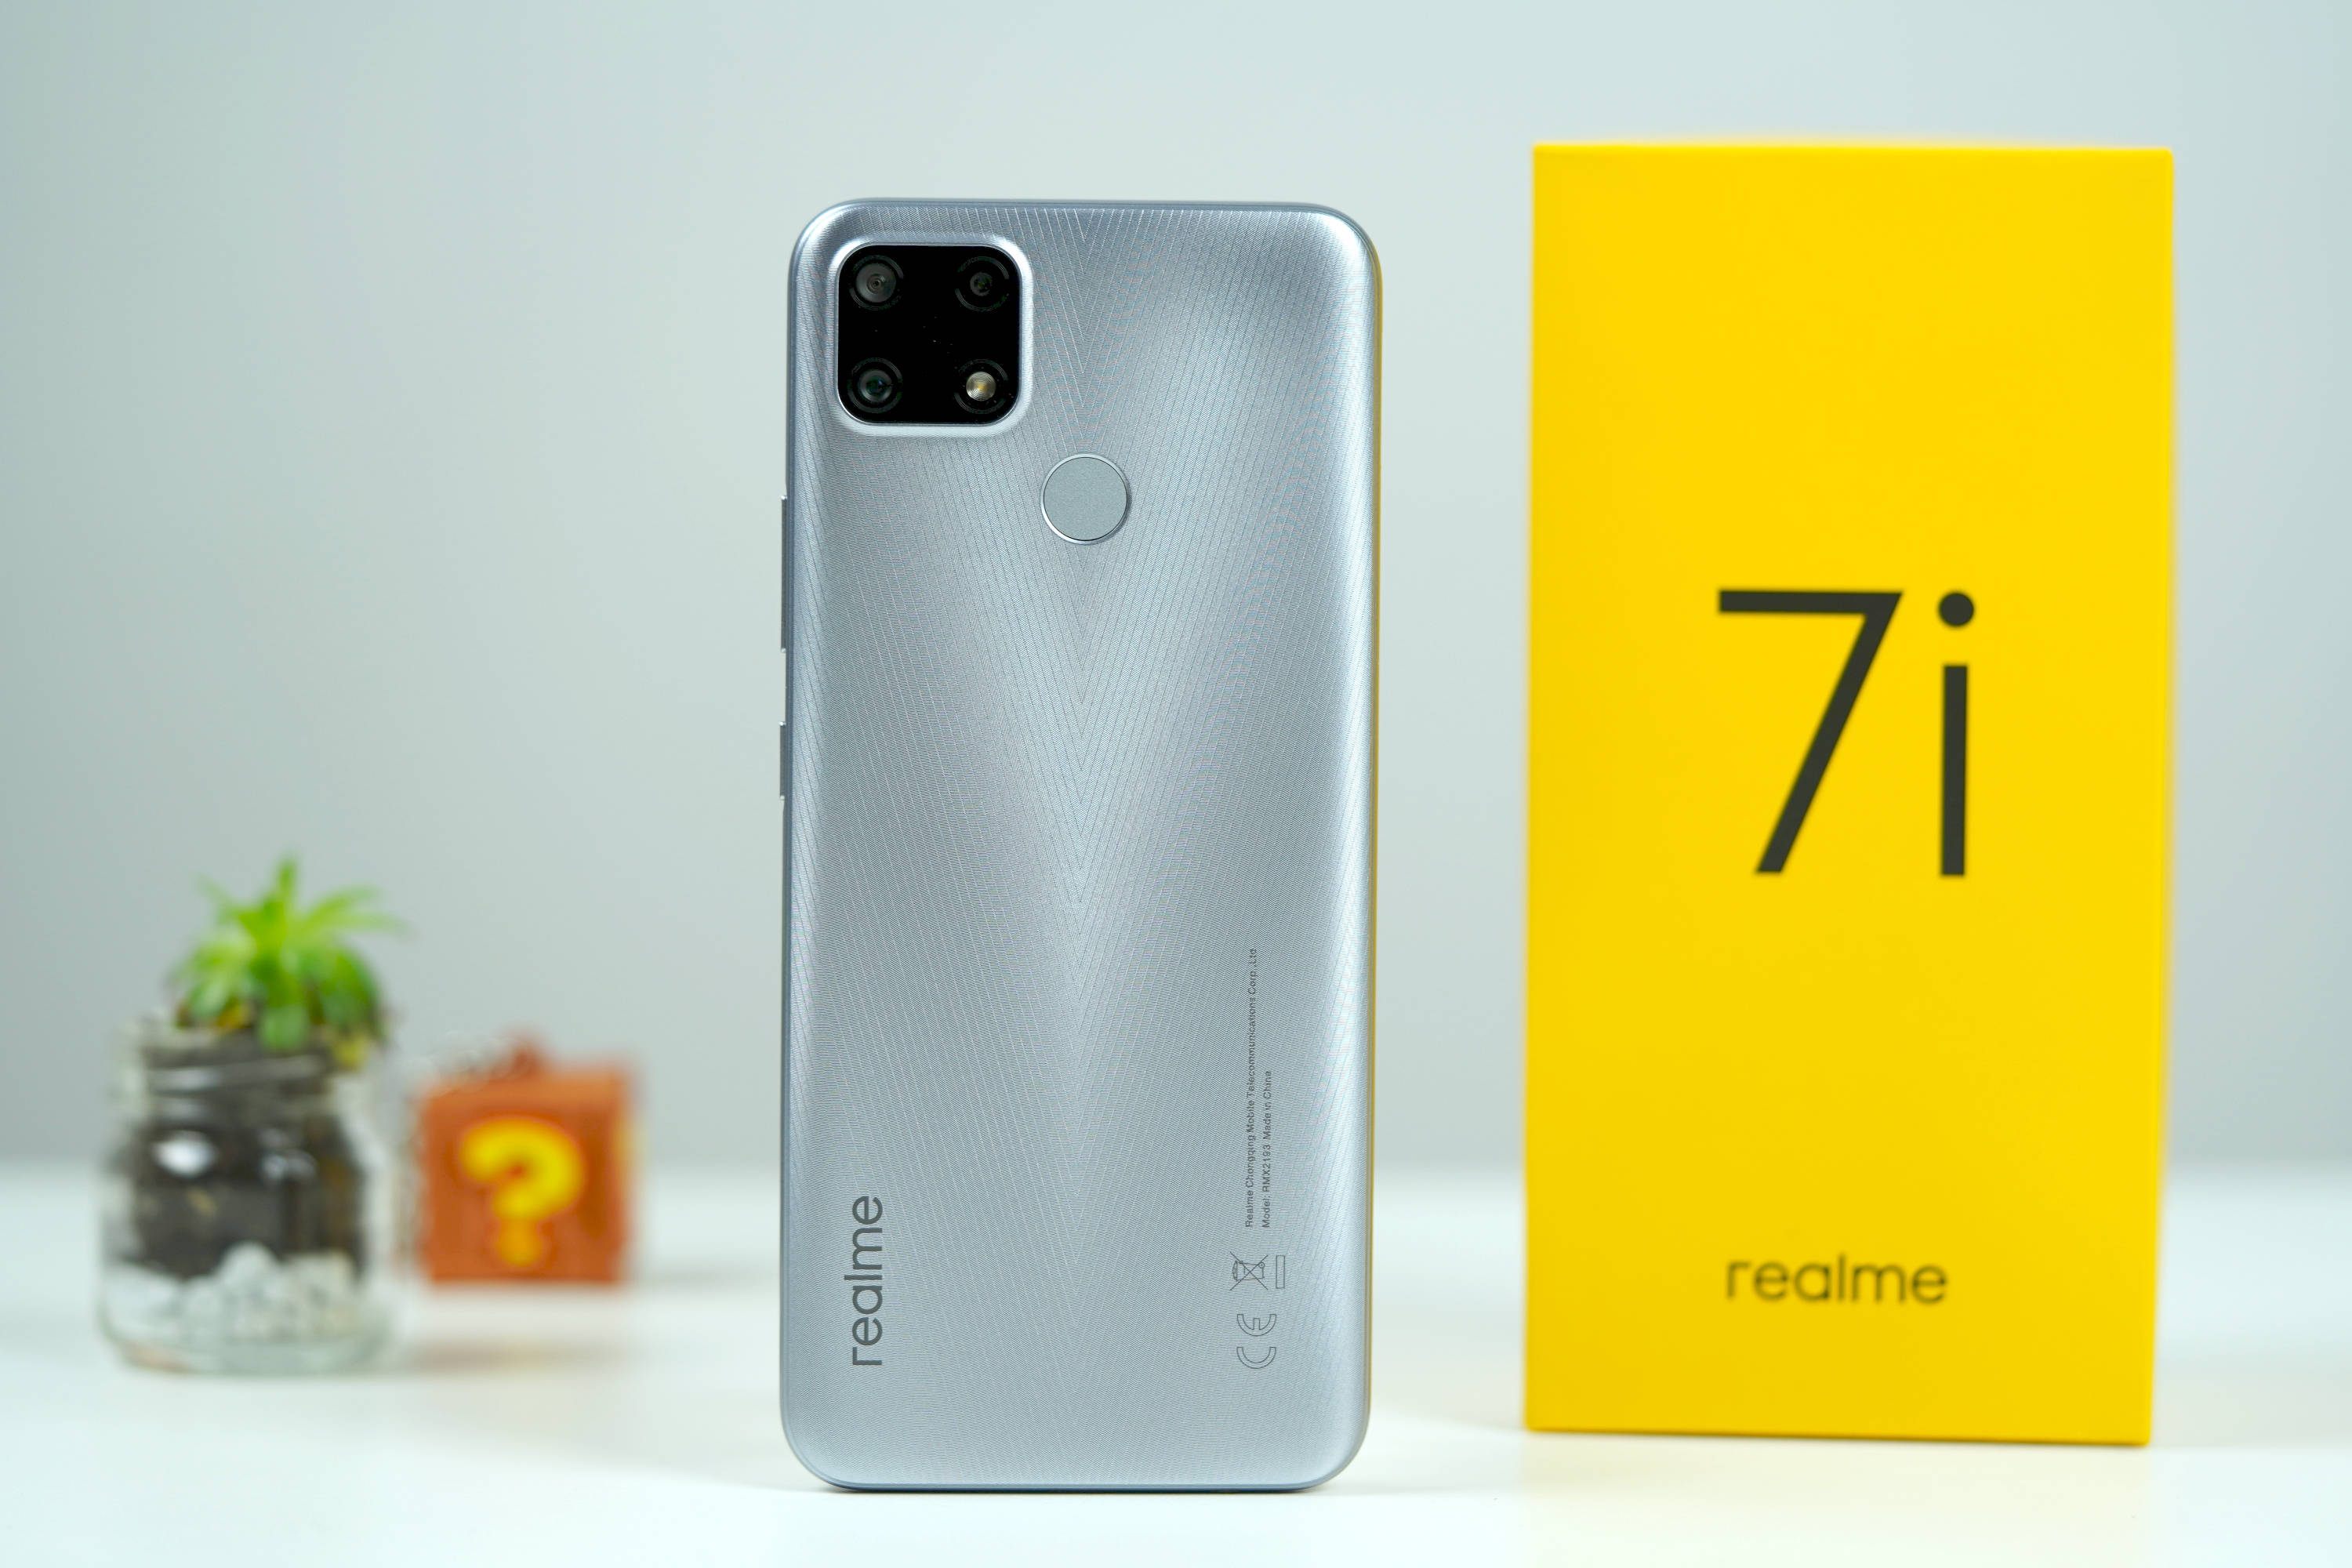 Realme 7I review - forget about the charger